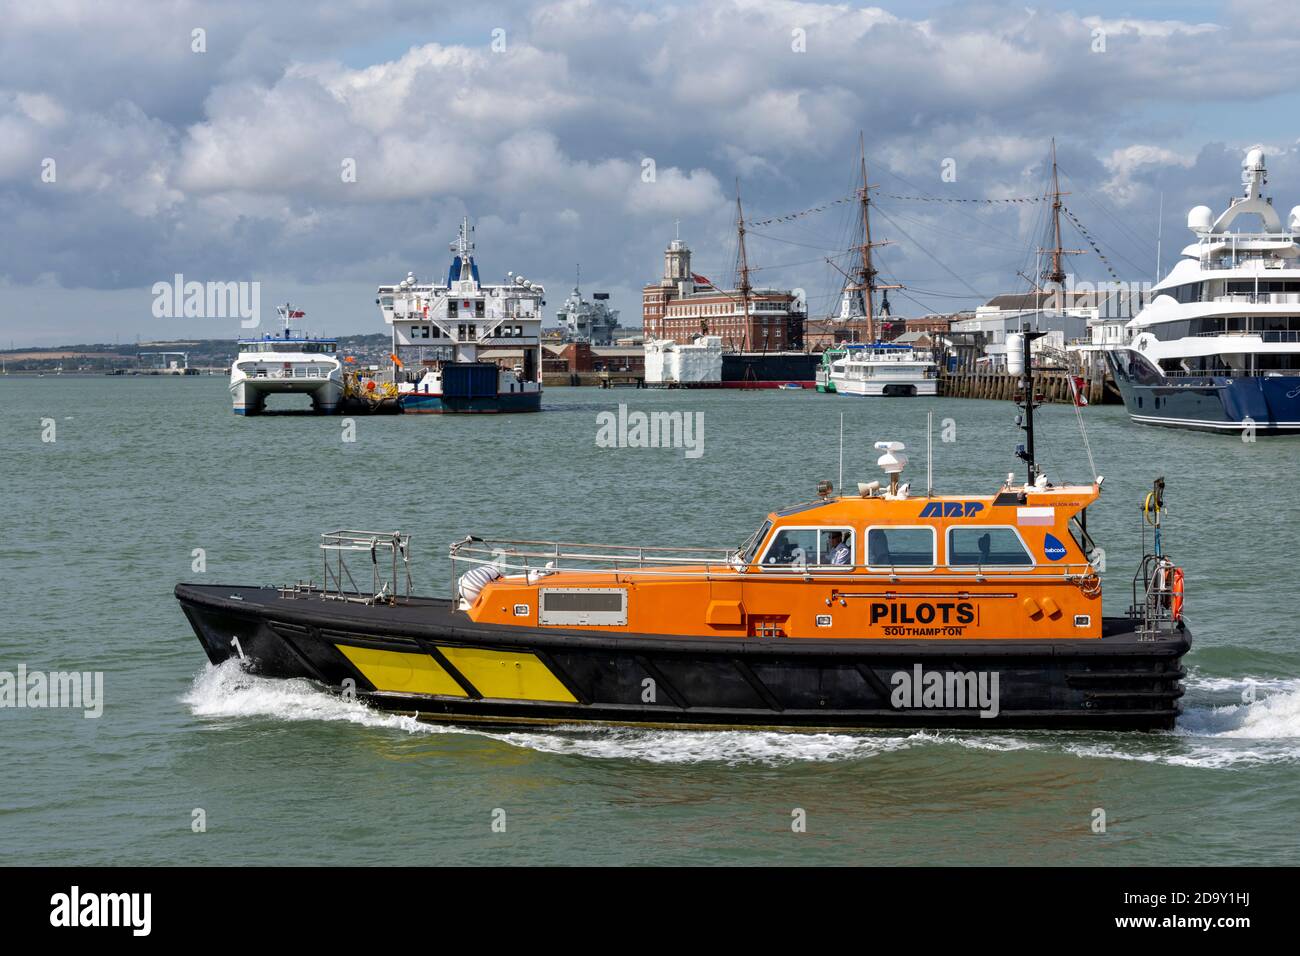 Southampton Pilot boat Hamwic a Halmatic Nelson 48/50 launch in Portsmouth Harbour, Portsmouth, Hampshire, England, UK Stock Photo